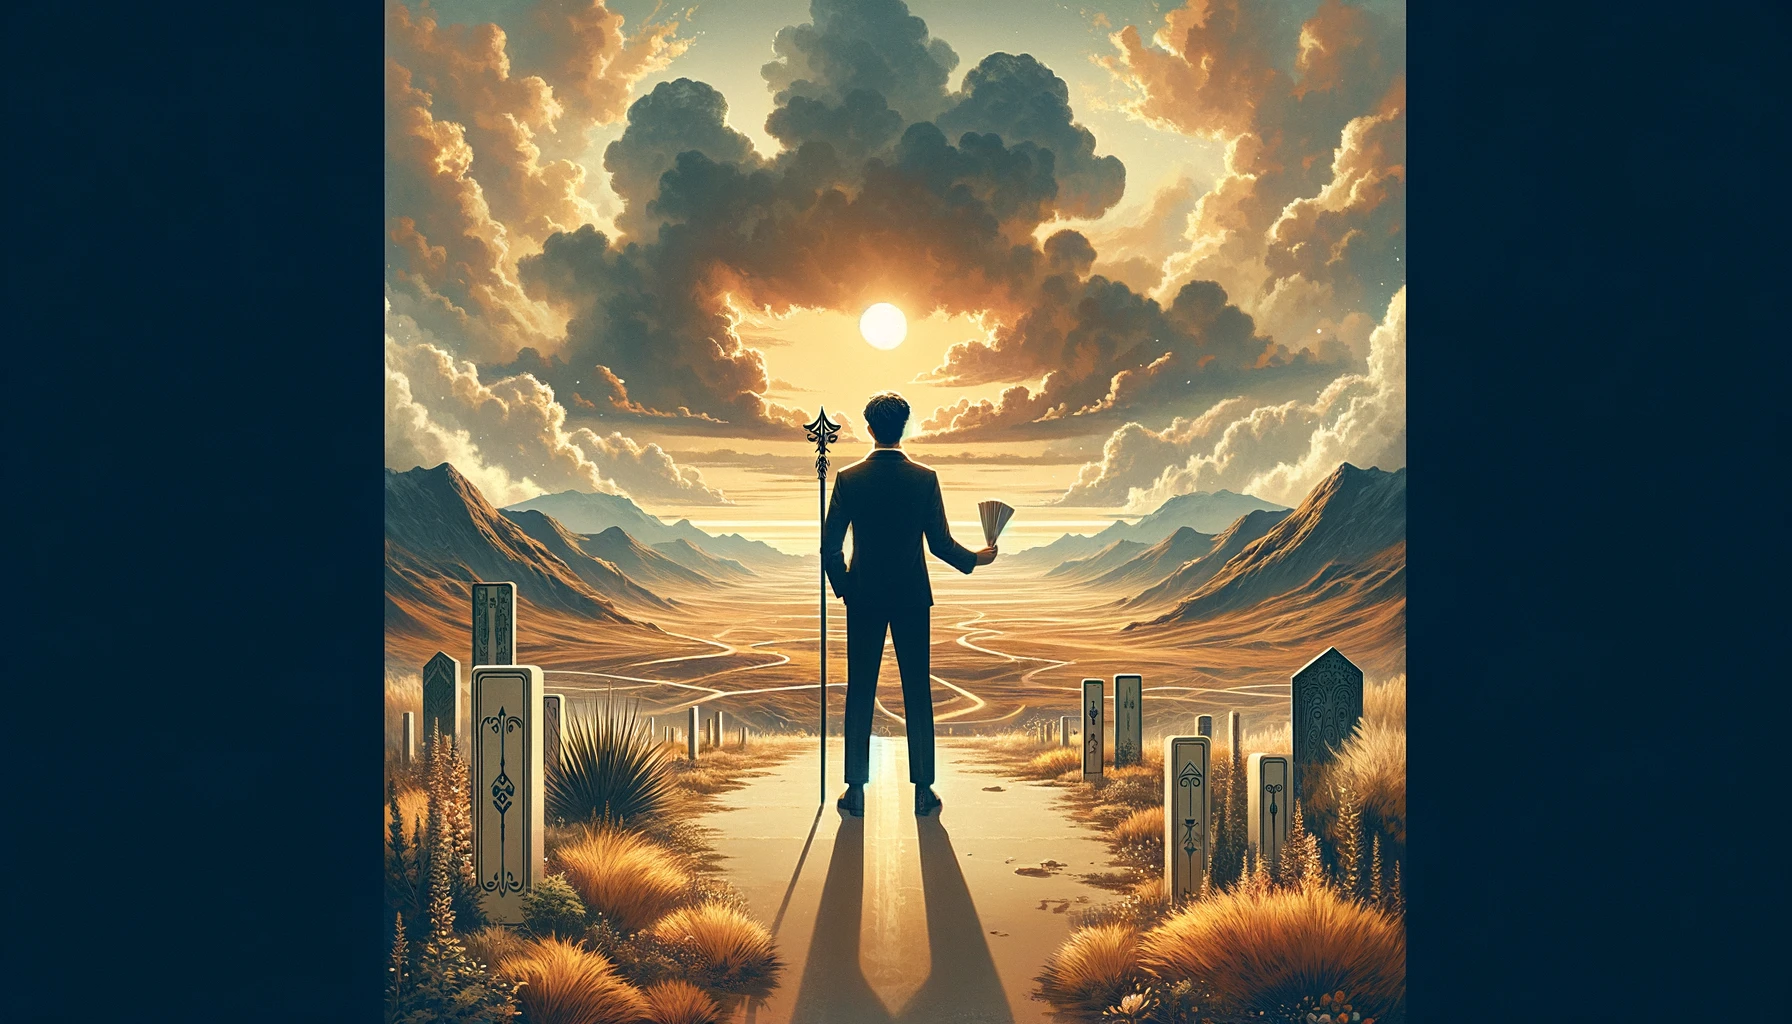 "An individual stands atop a cliff, overlooking a vast and diverse landscape. Their gaze is focused forward, towards distant horizons, embodying the spirit of exploration and decision-making. The image evokes the visionary path of crafting one's destiny amidst a world of boundless possibilities."